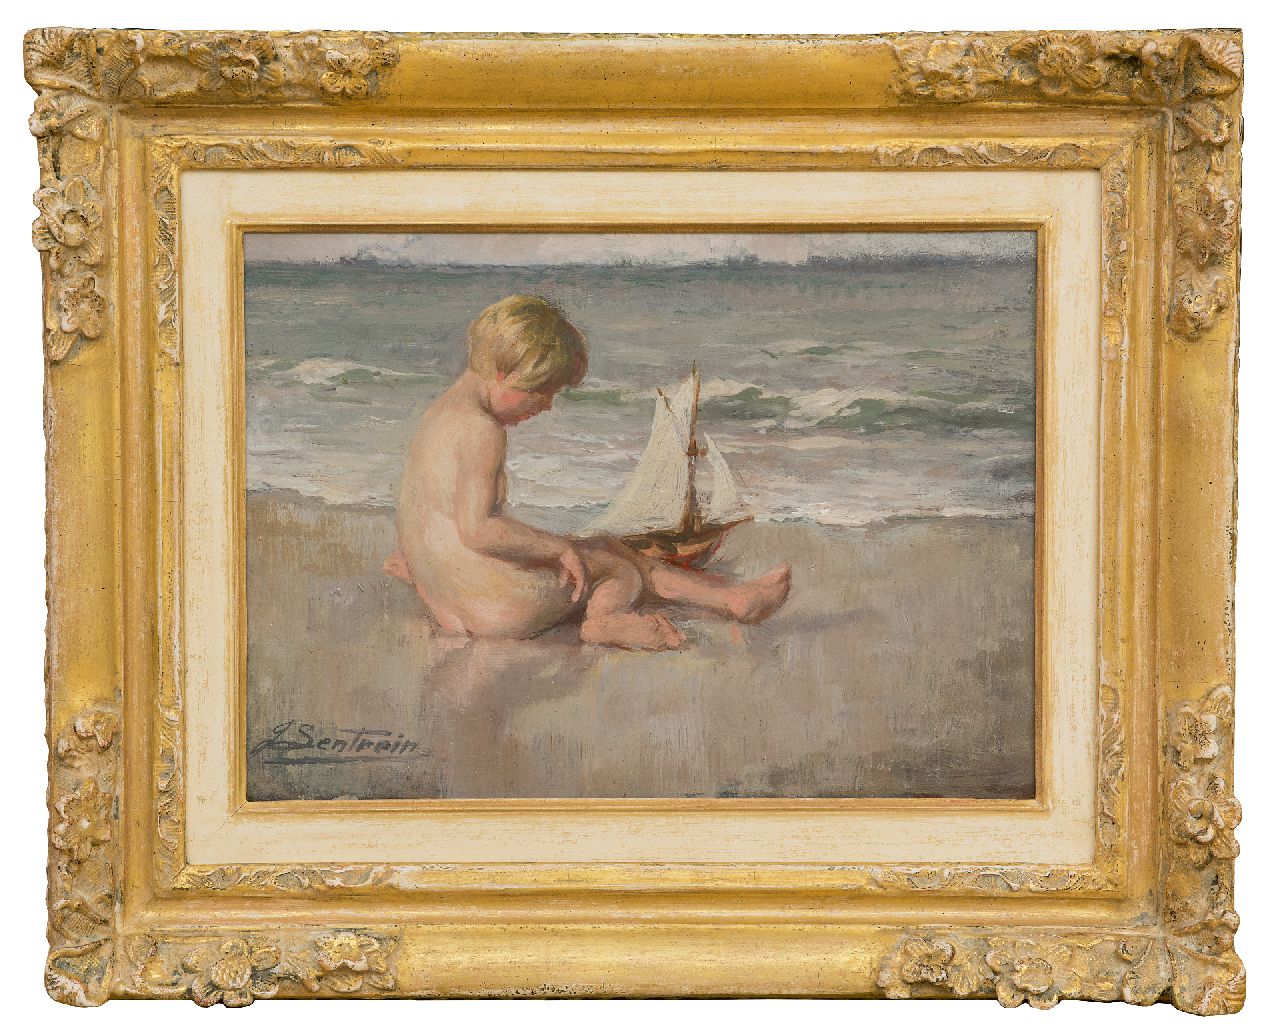 Lentrein J.  | Jules Lentrein | Paintings offered for sale | Girl playing on the beach, oil on panel 25.0 x 35.0 cm, signed l.l.